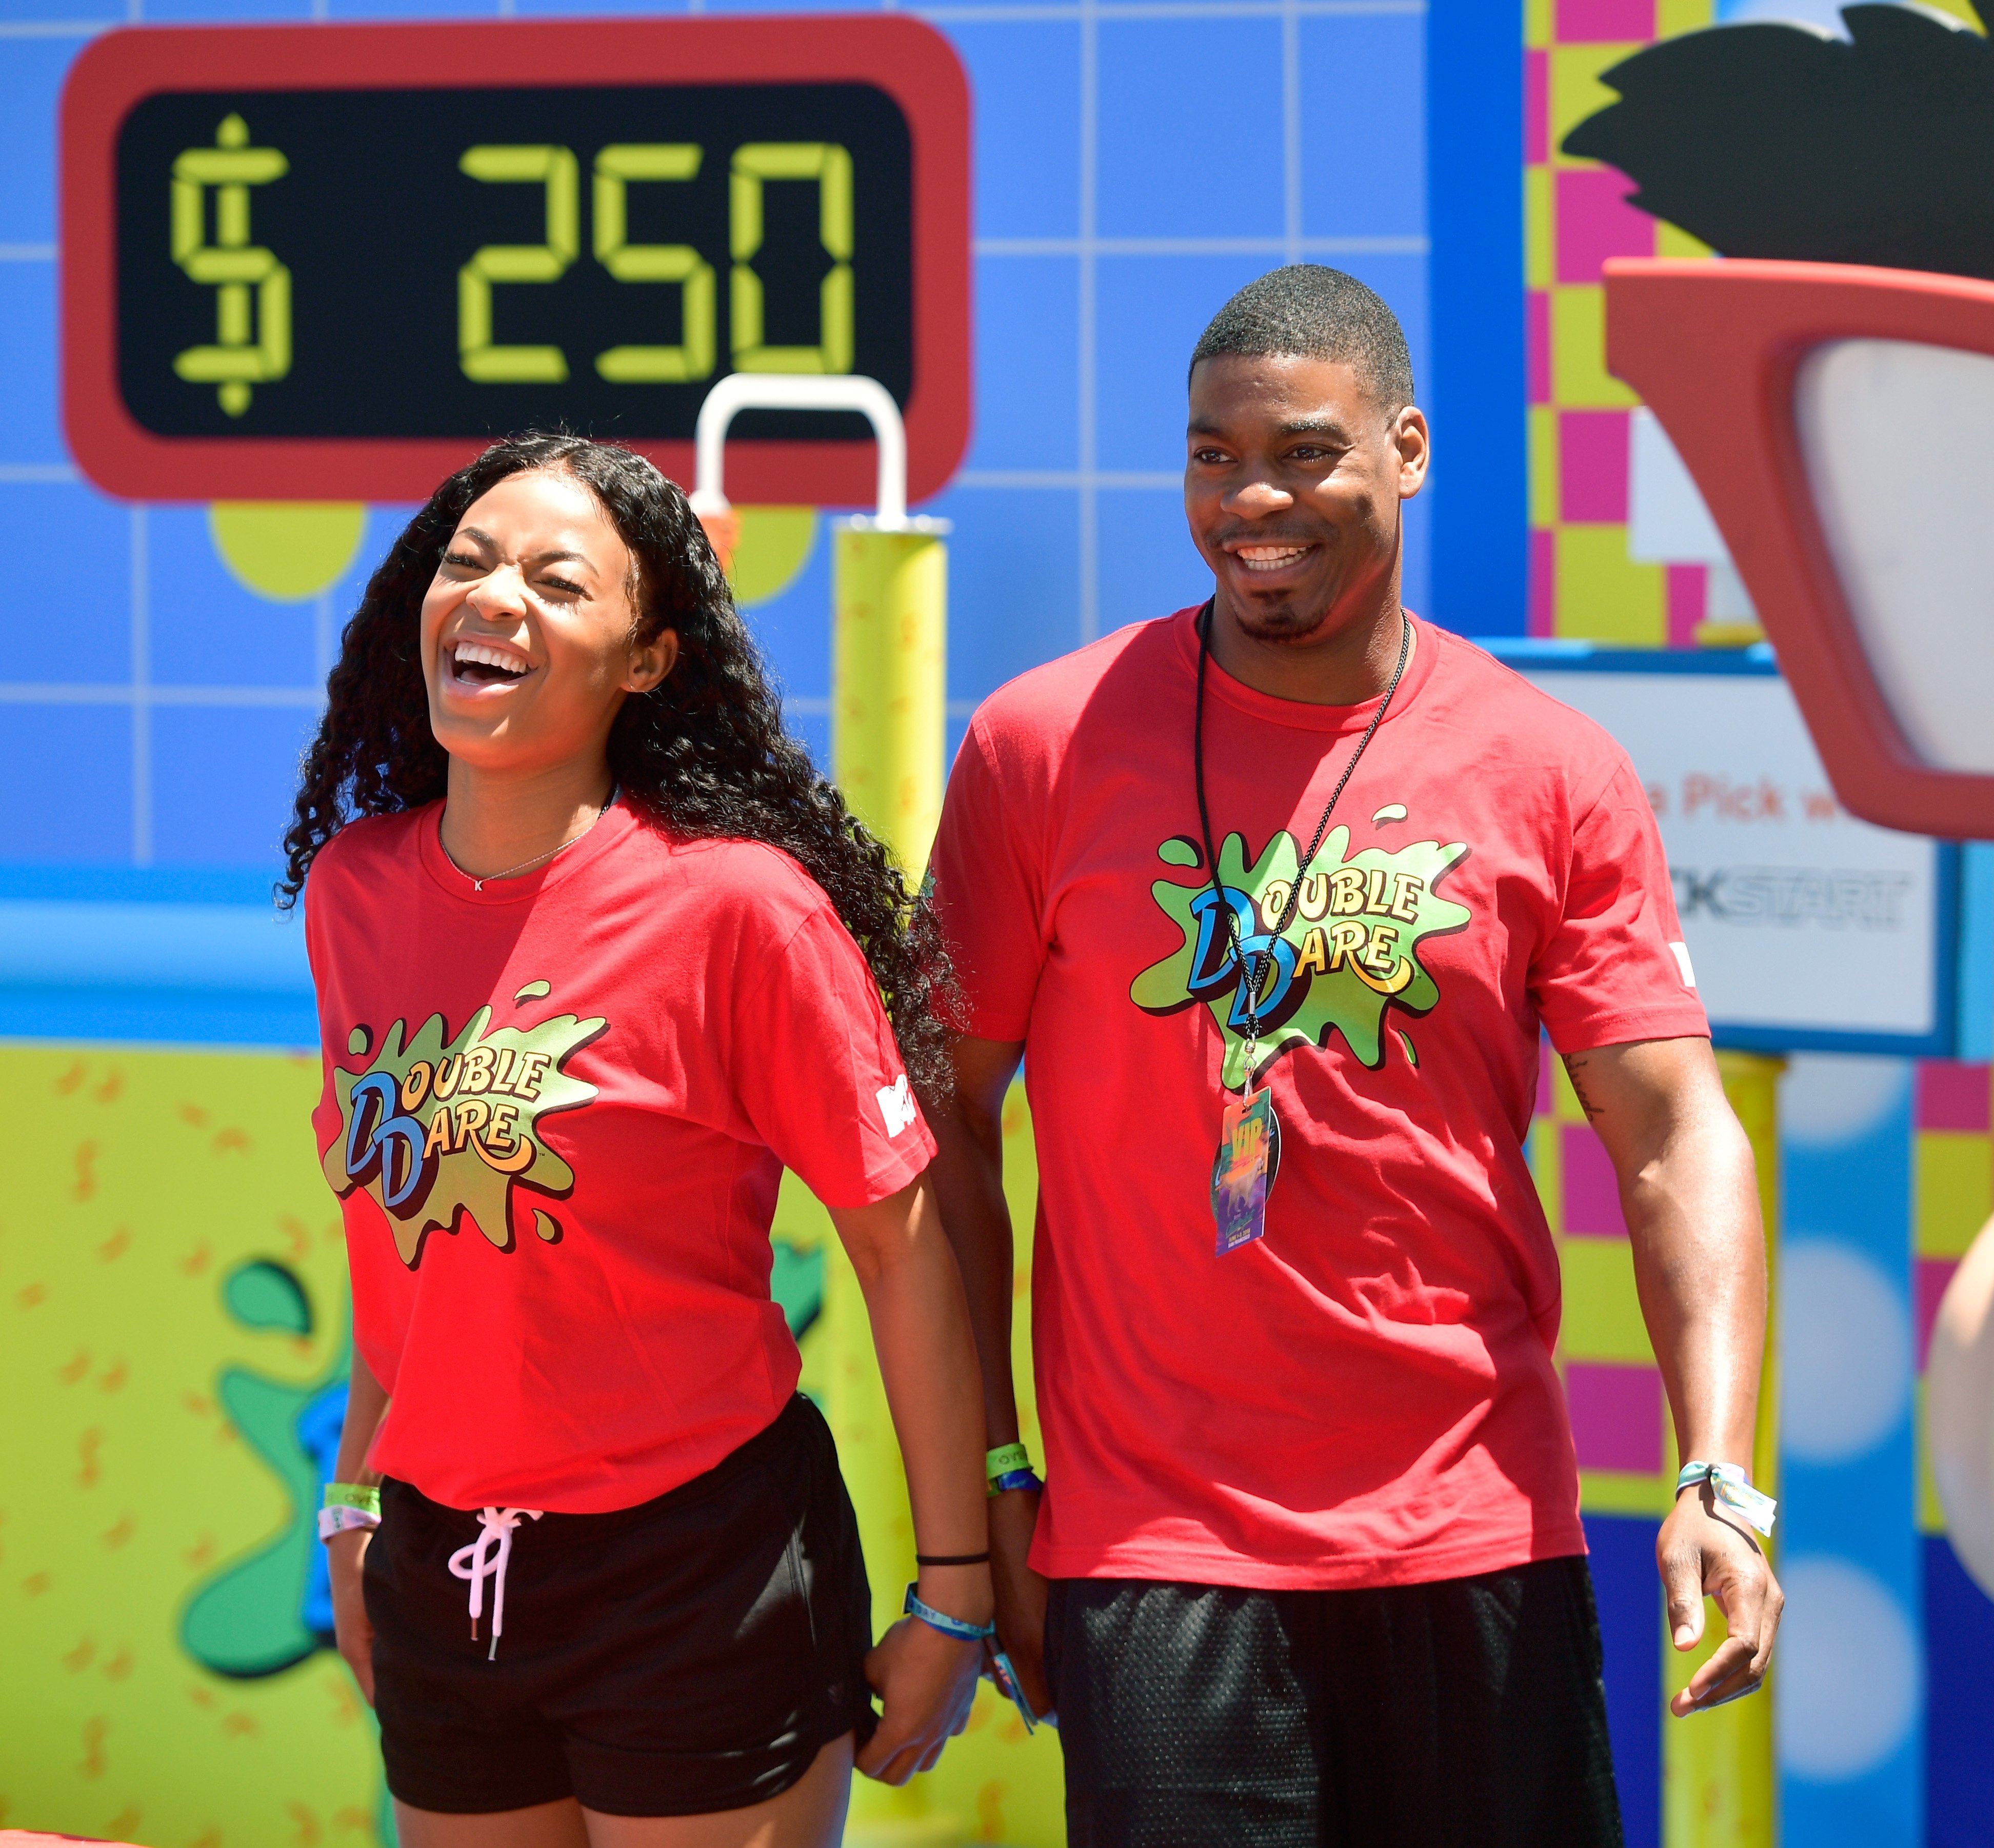 'The Challenge' stars Kam Williams and Leroy Garrett smiling at Double Dare